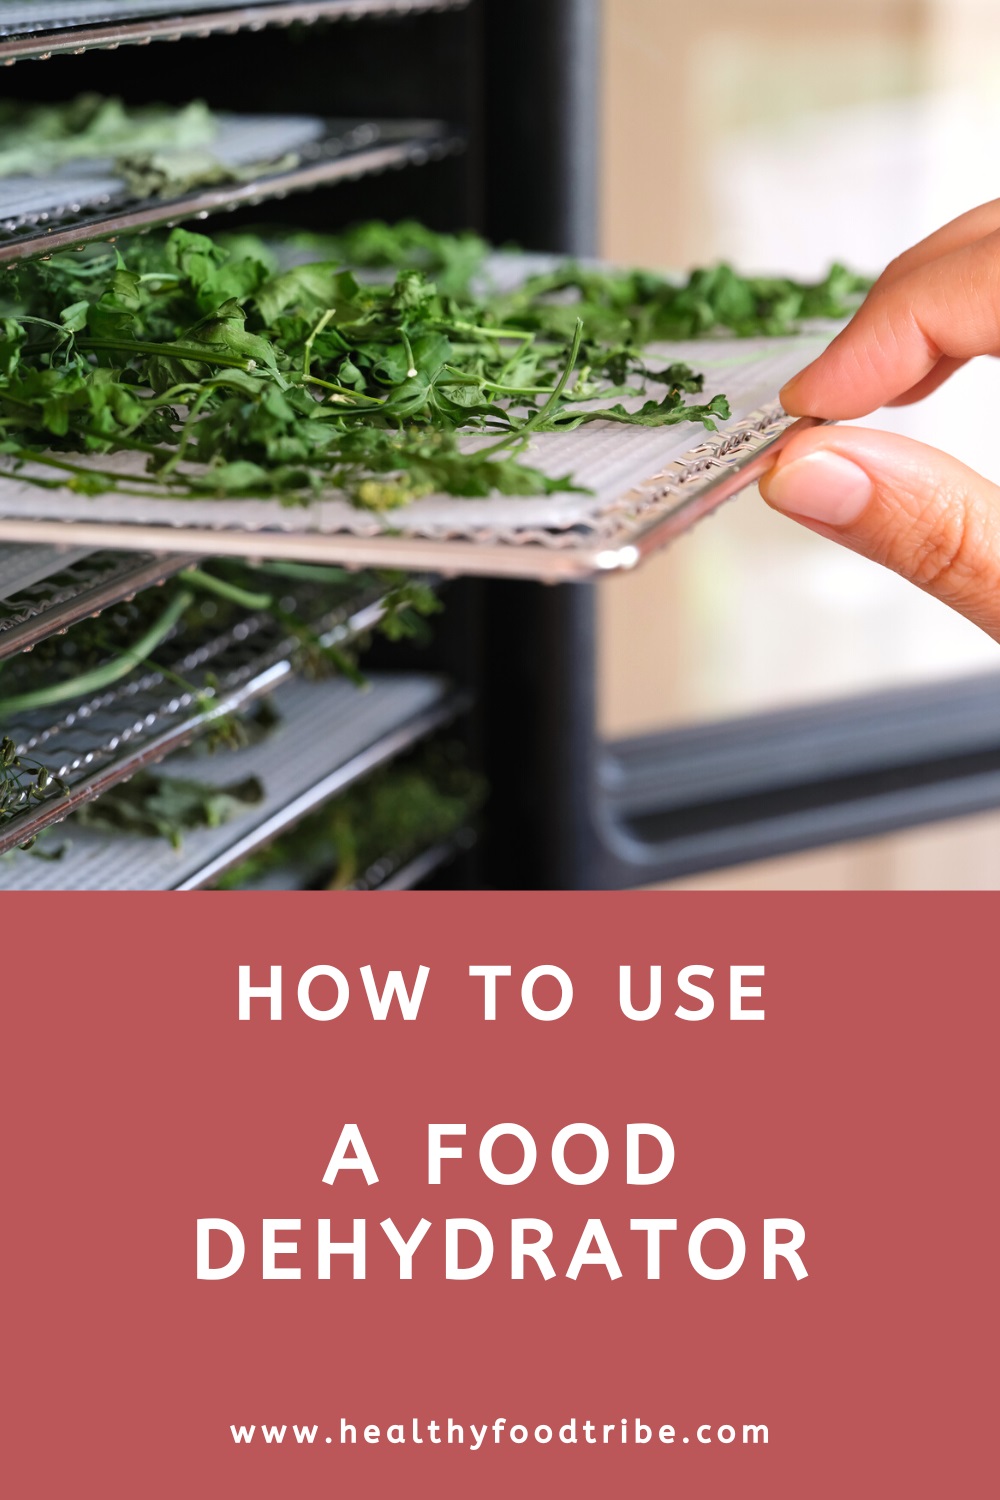 How to use a food dehydrator